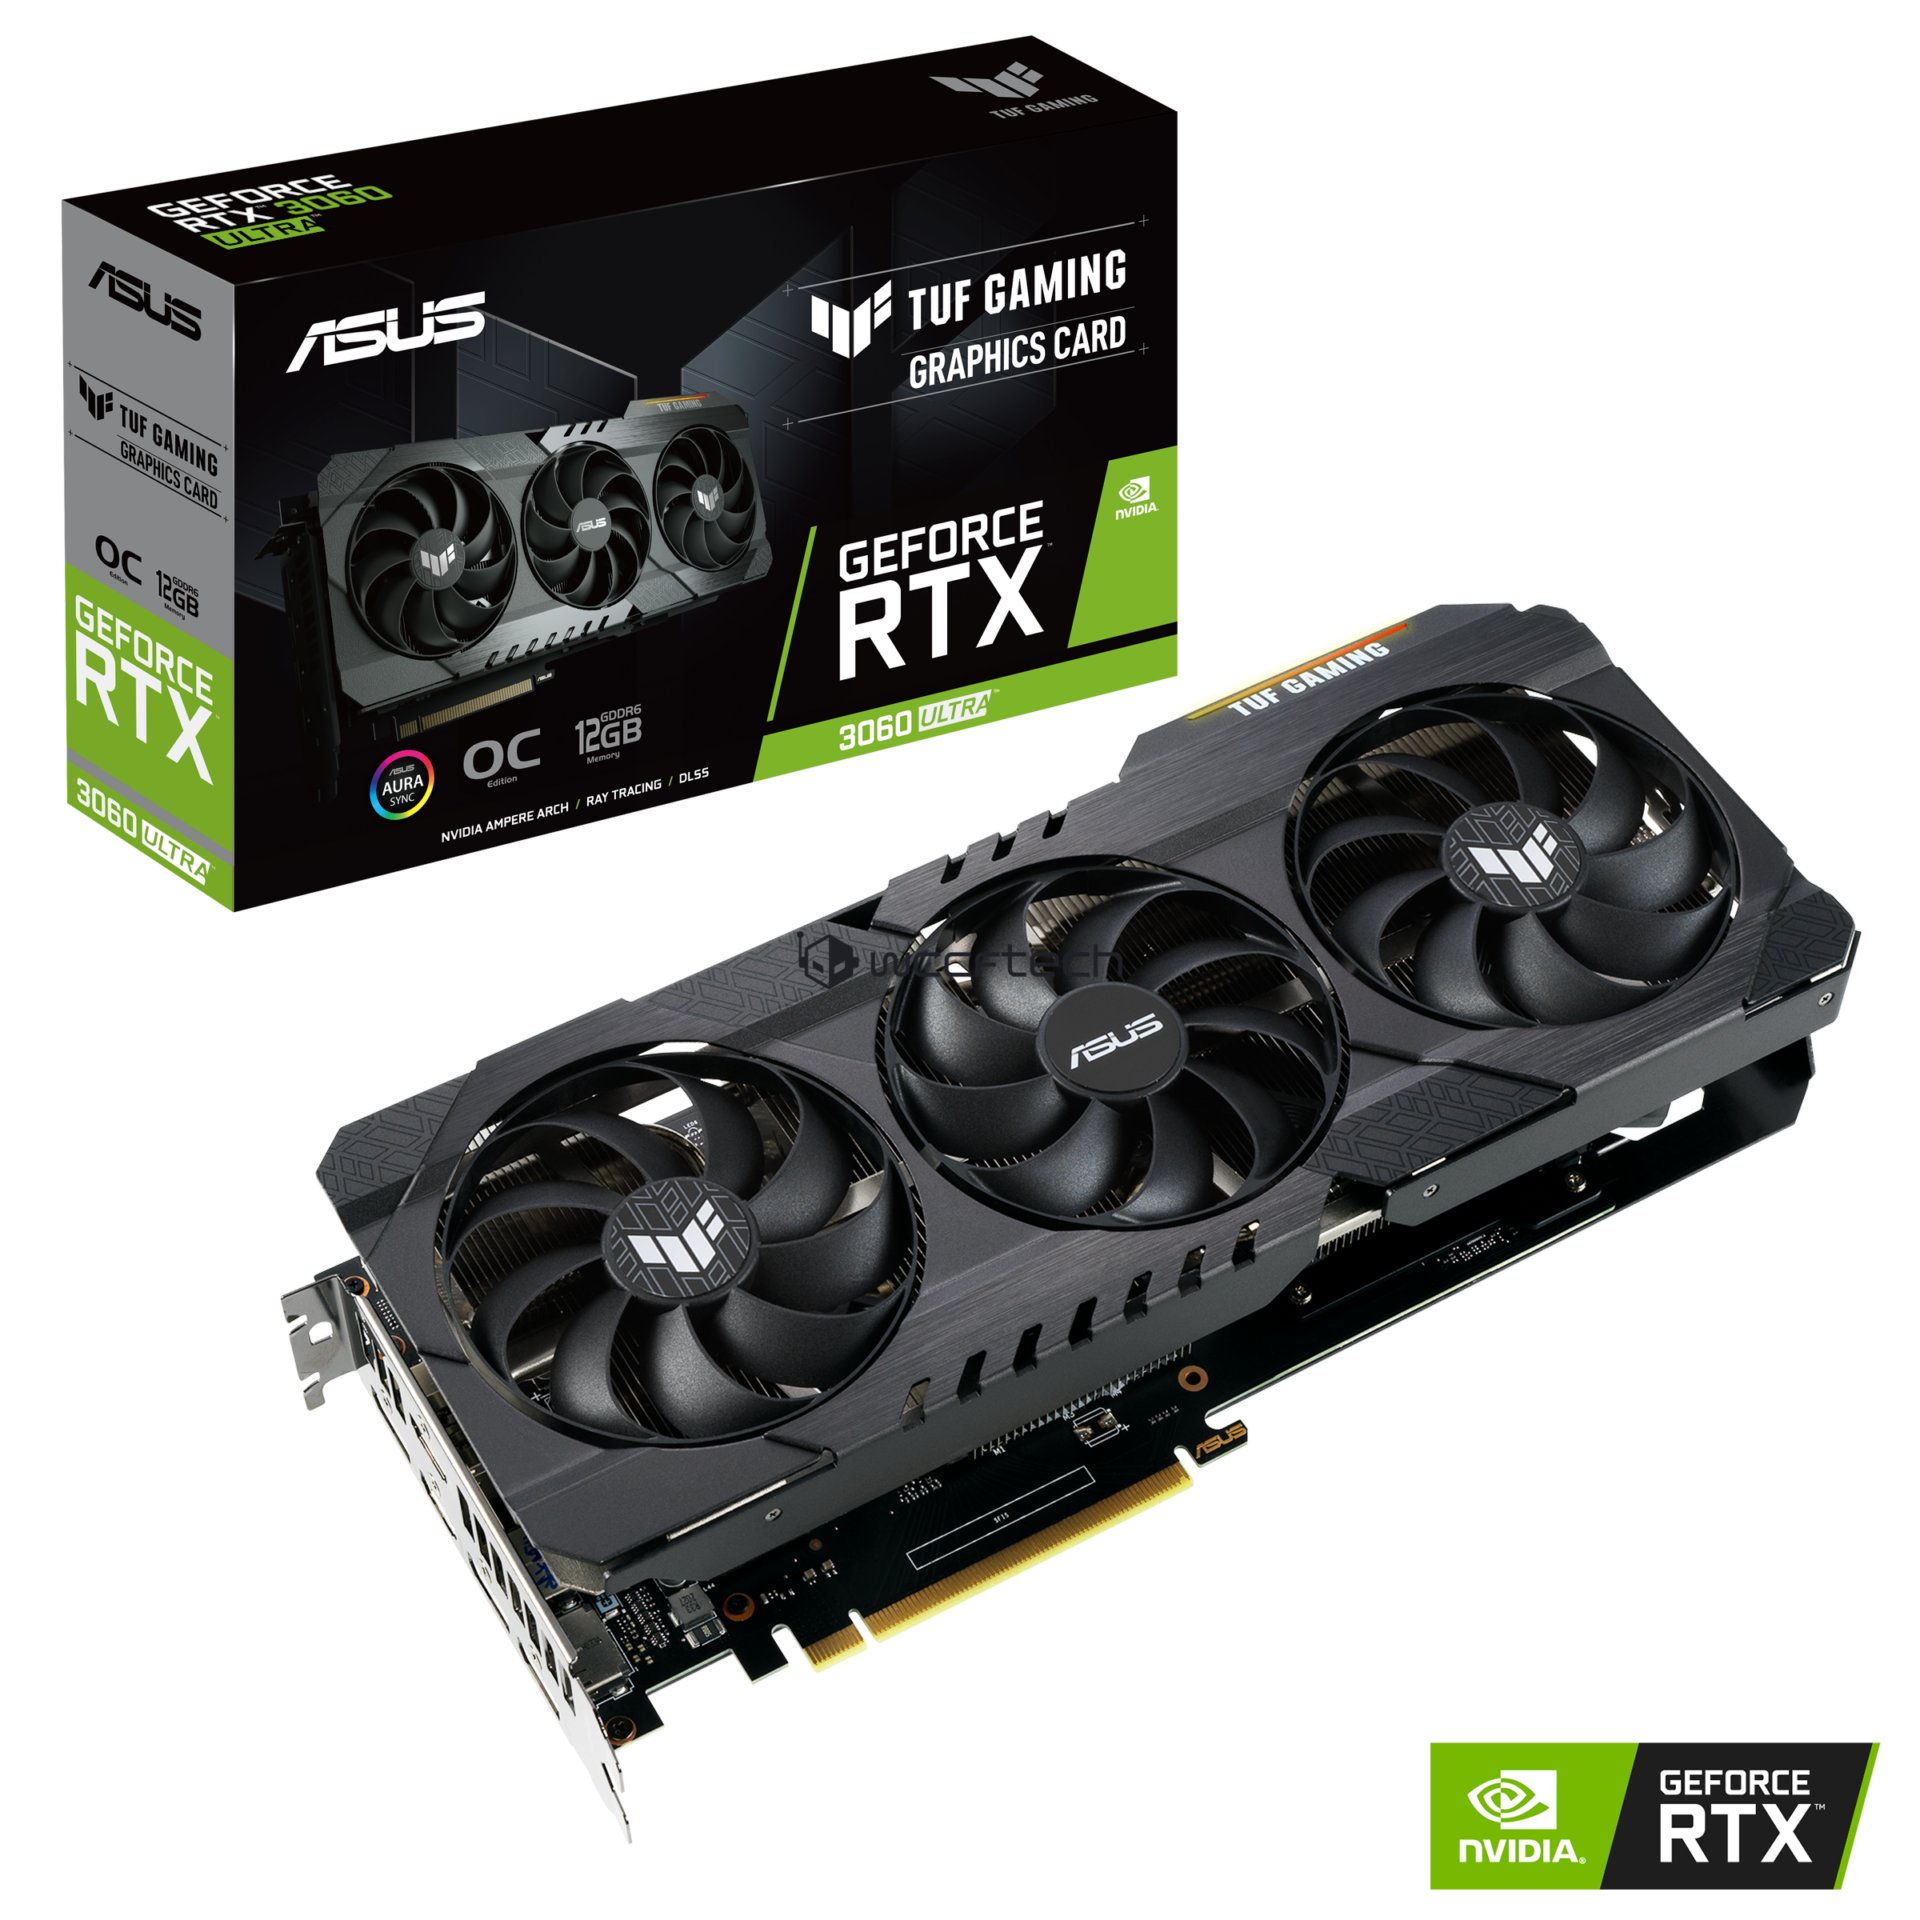 ASUS-GeForce-RTX-3060-Ultra-12-GB-GDDR6-Graphics-Card-Pictured-1-1920x1920.png